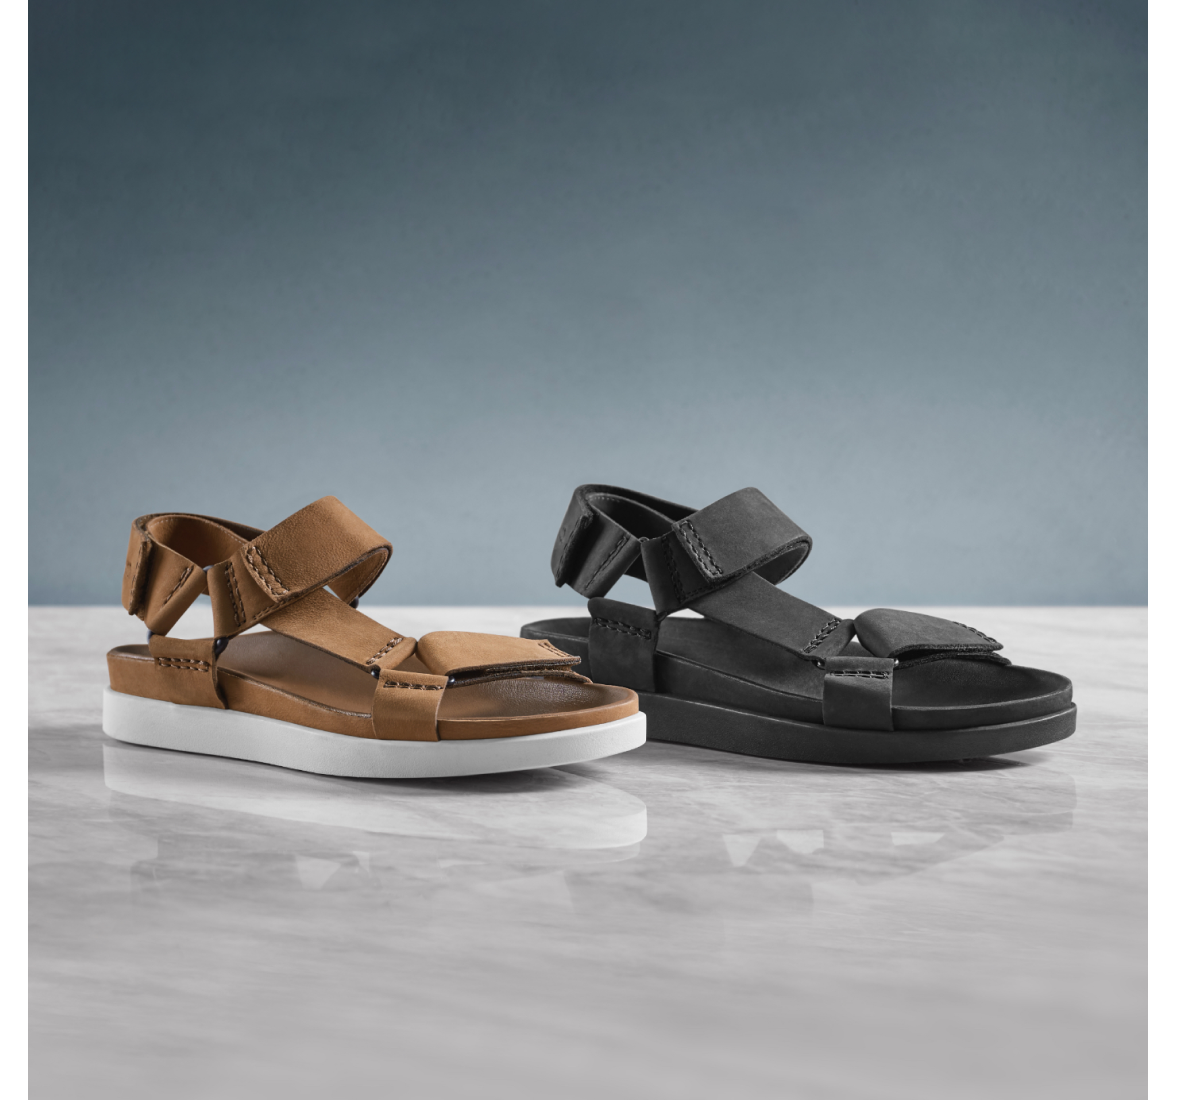 mens sandals Sunder Range in tan and black links to search results page